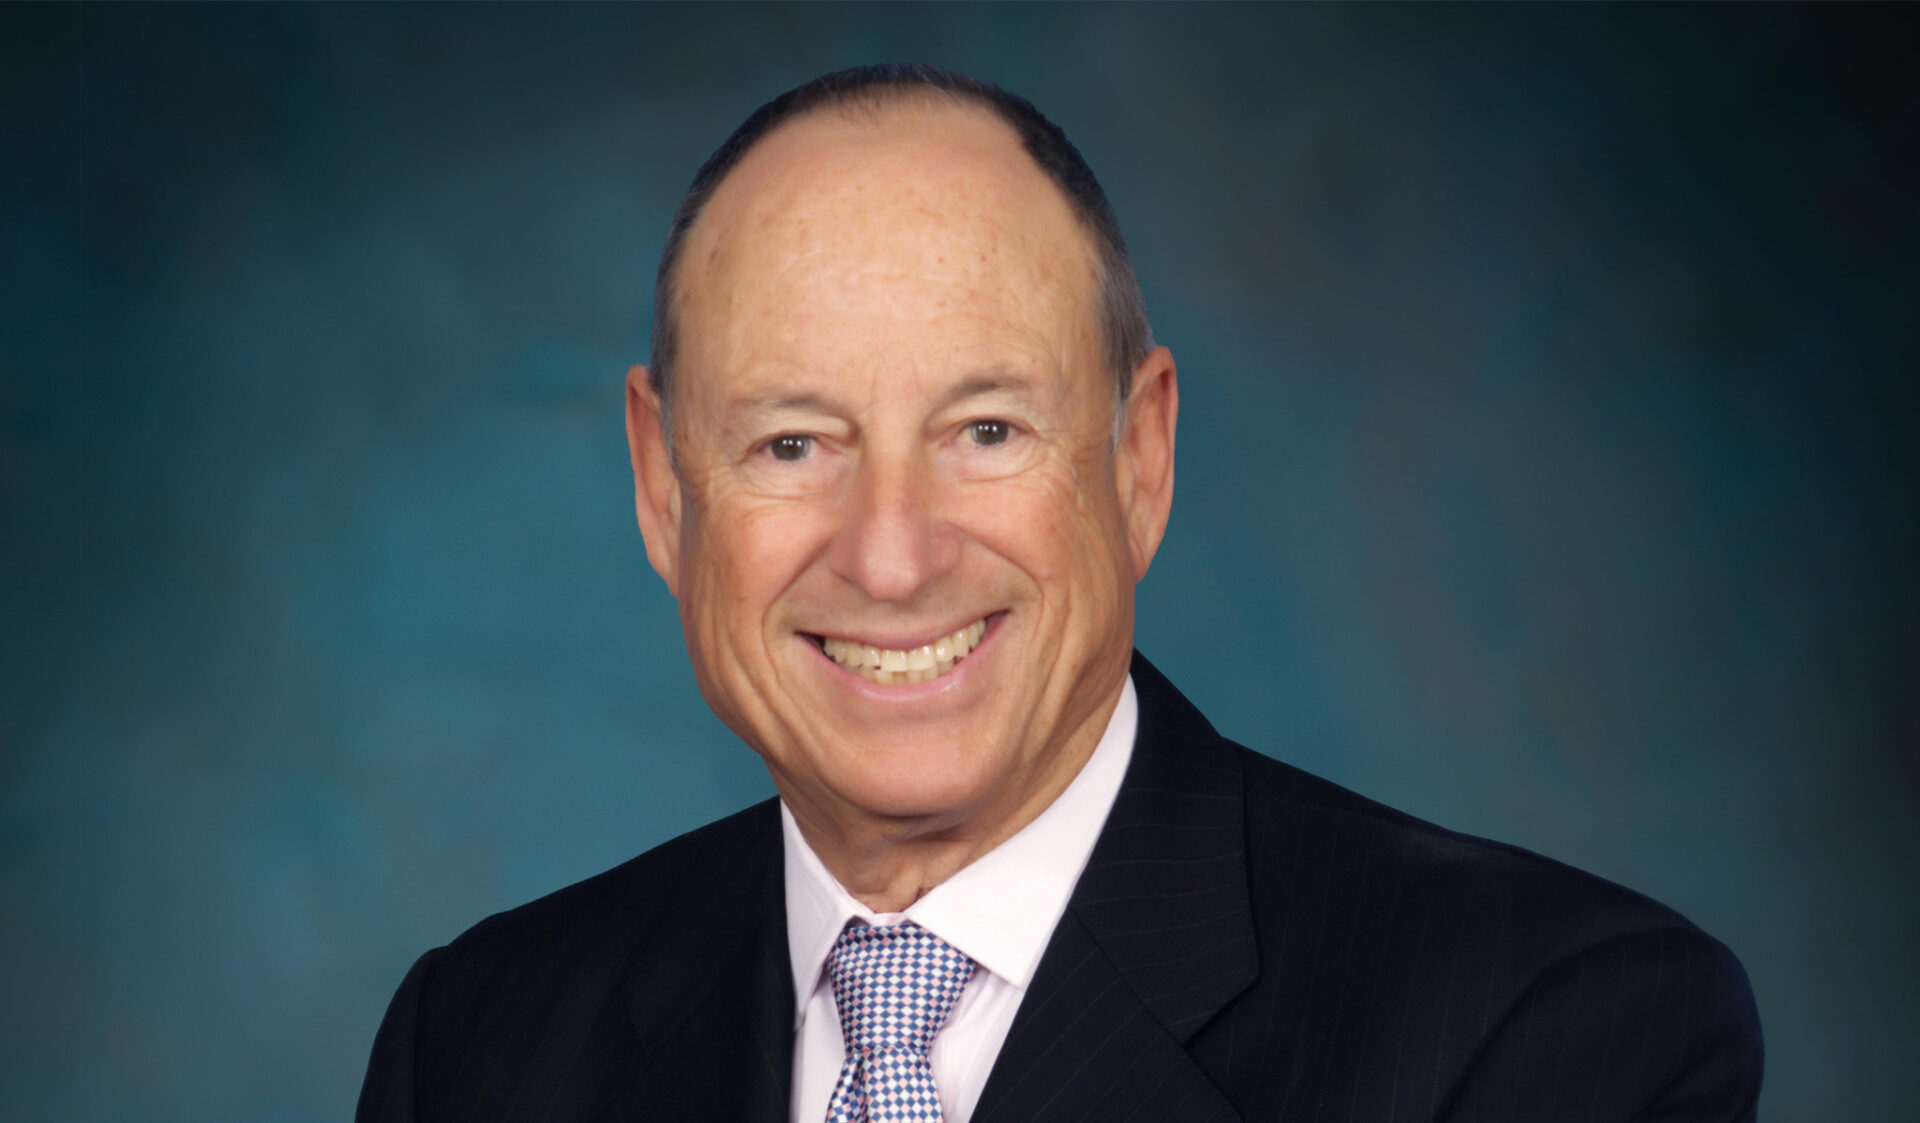 Longtime San Diego Business Leader, Civic Leader and Philanthropist Stephen Cushman Appointed to San Diego Housing Commission Board